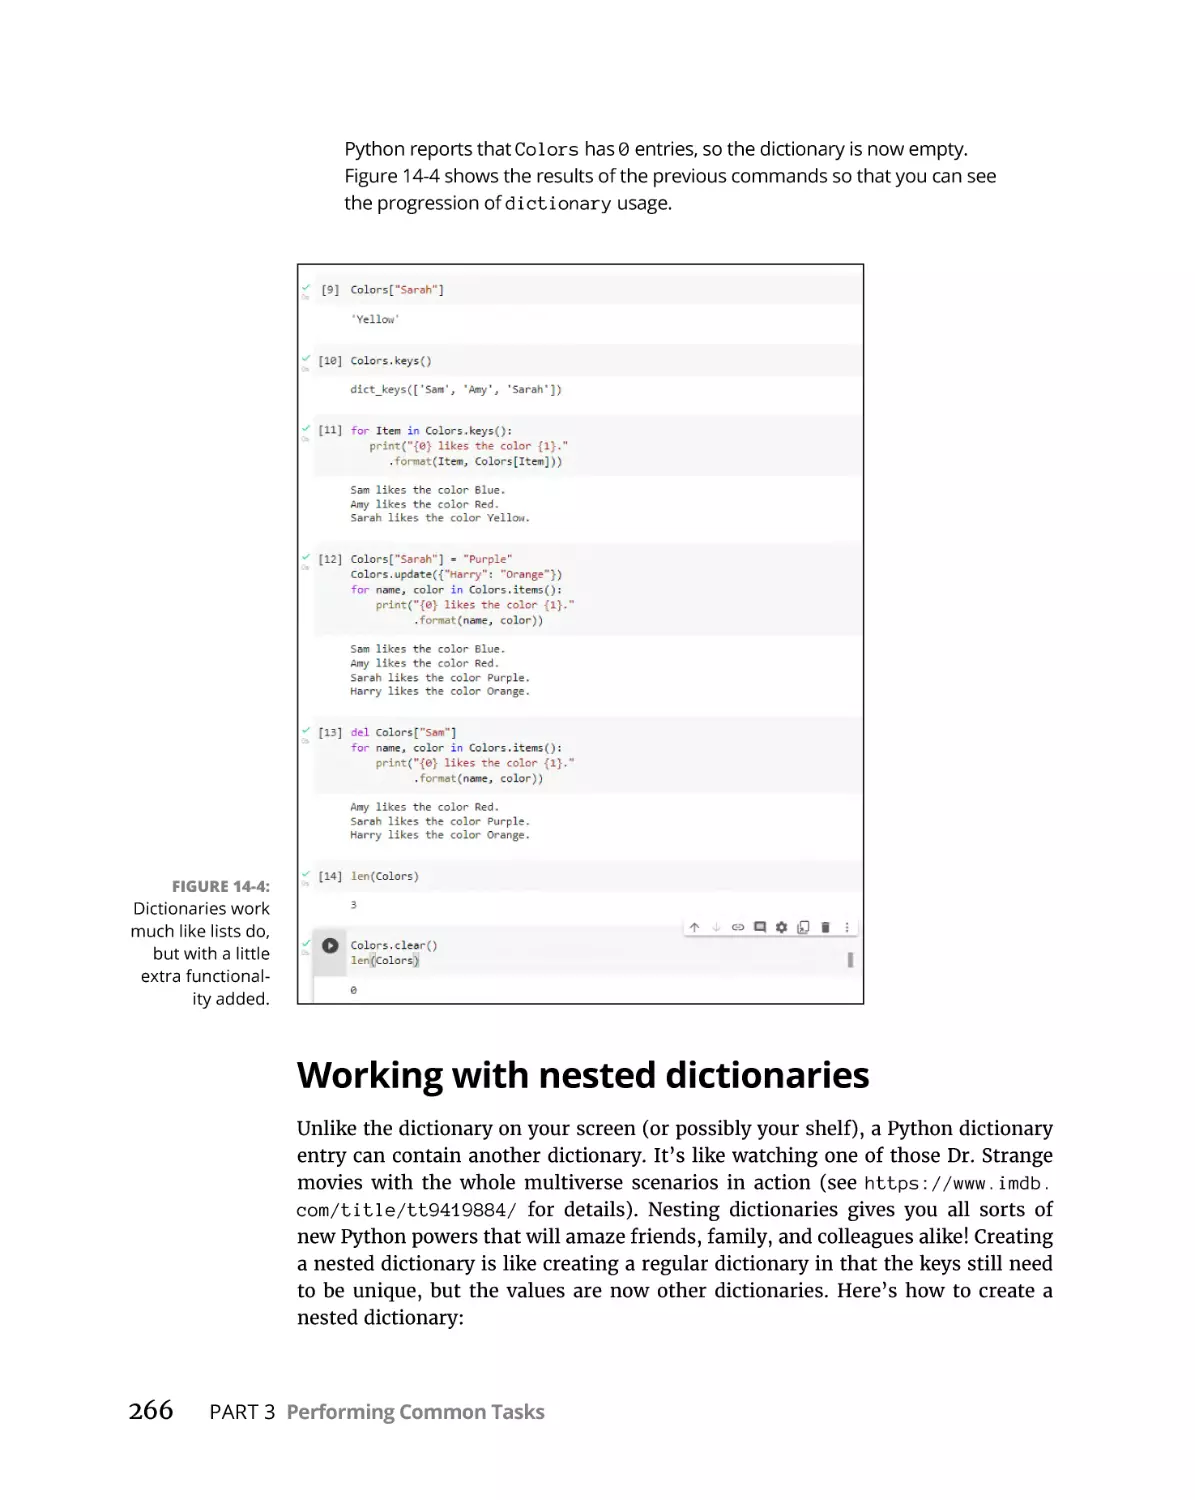 Working with nested dictionaries